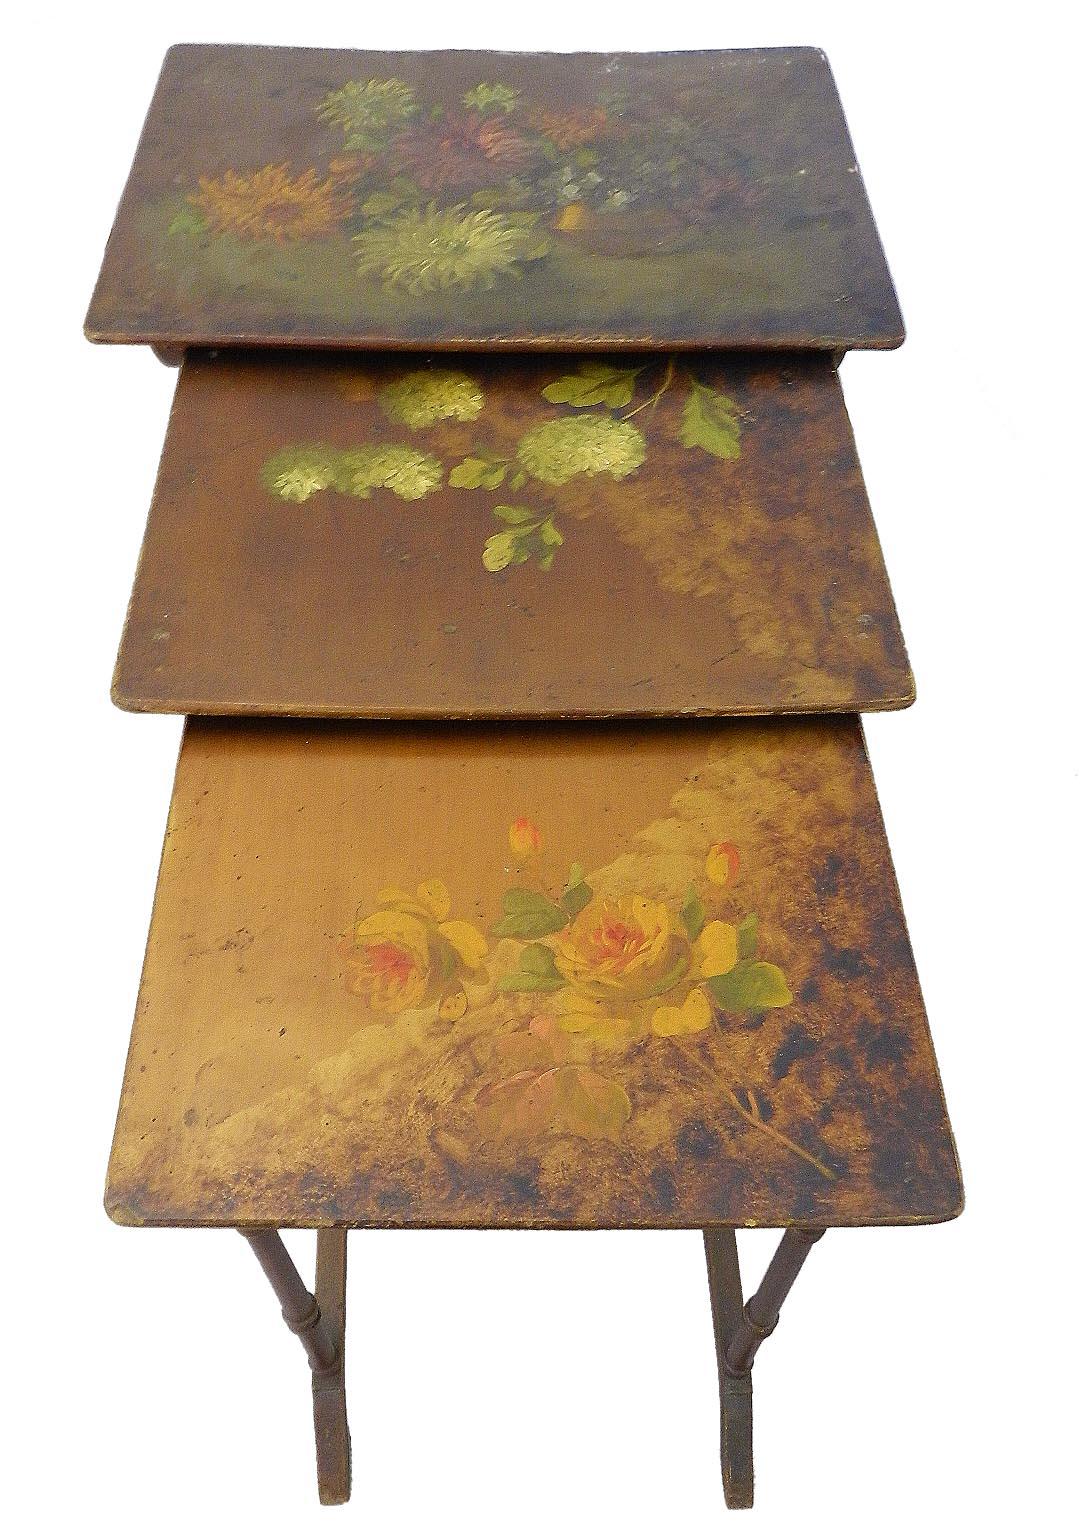 Set of 3 antique nest of tables nesting tables hand painted individual one of a kind floral tops, French, circa 1880
Gloriously distressed through time
Superb original flower paintings 
Legs bronze with gold
Age worn patina 
Good antique